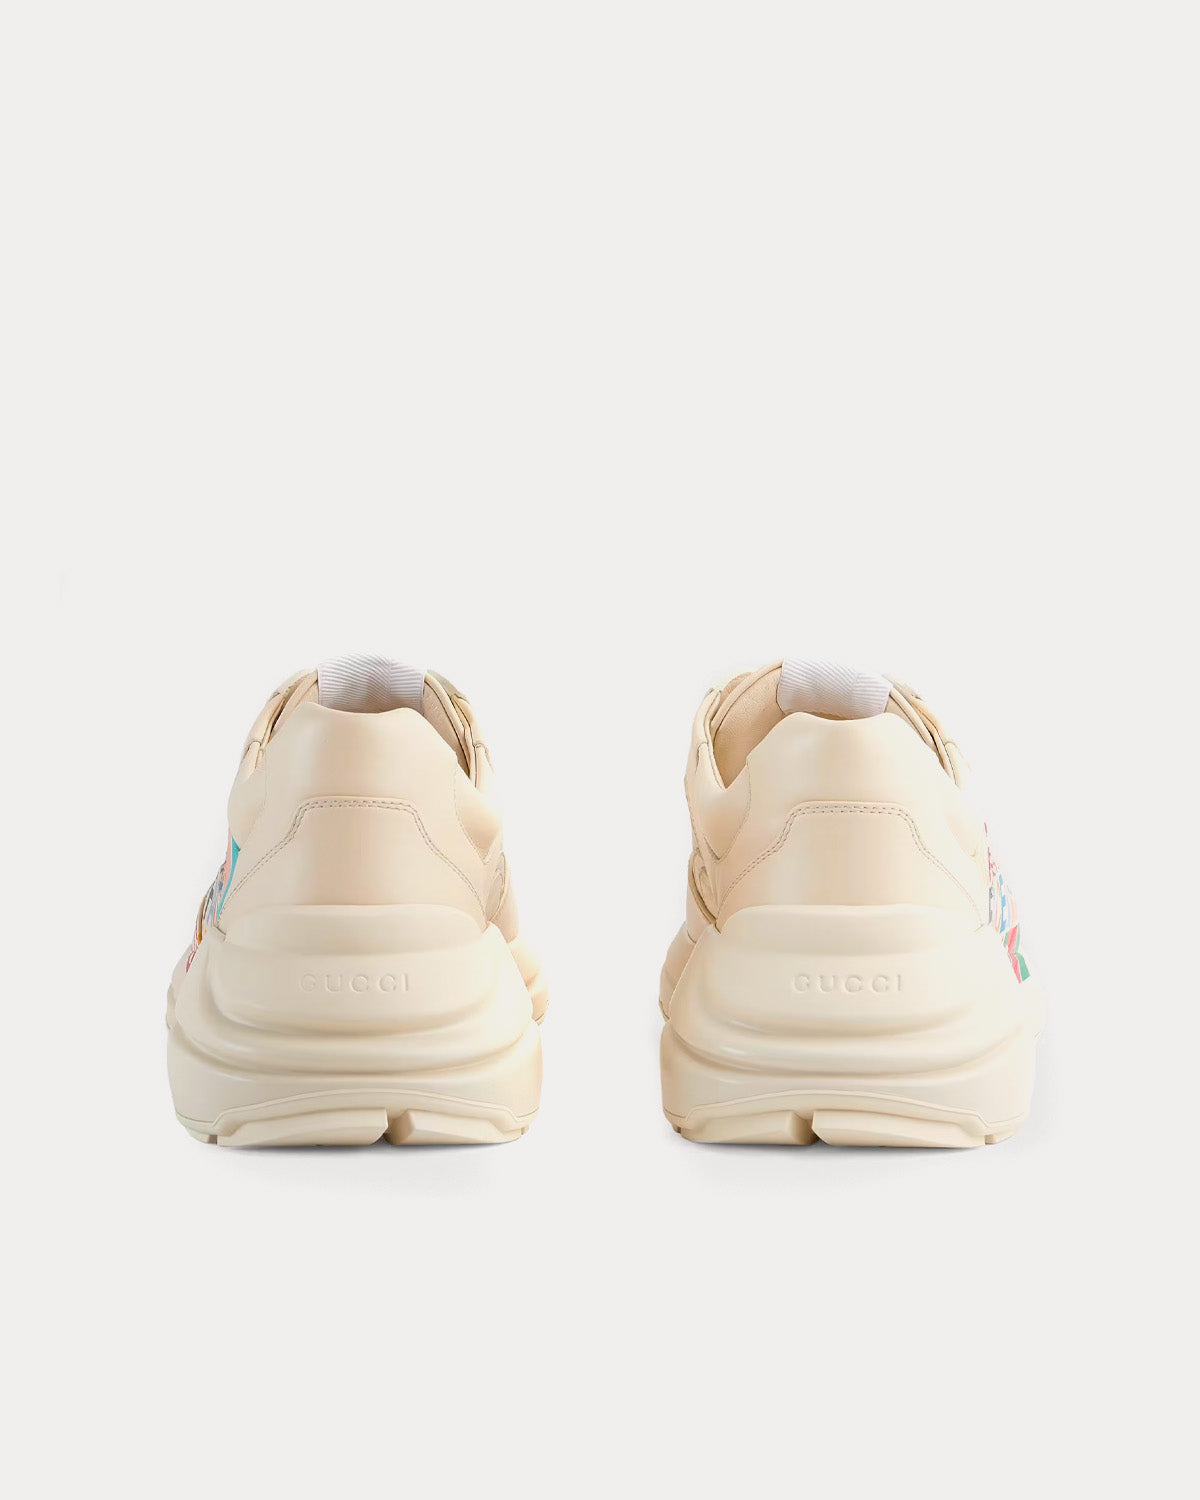 Gucci x The North Face - Rhyton Leather Ivory Low Top Sneakers